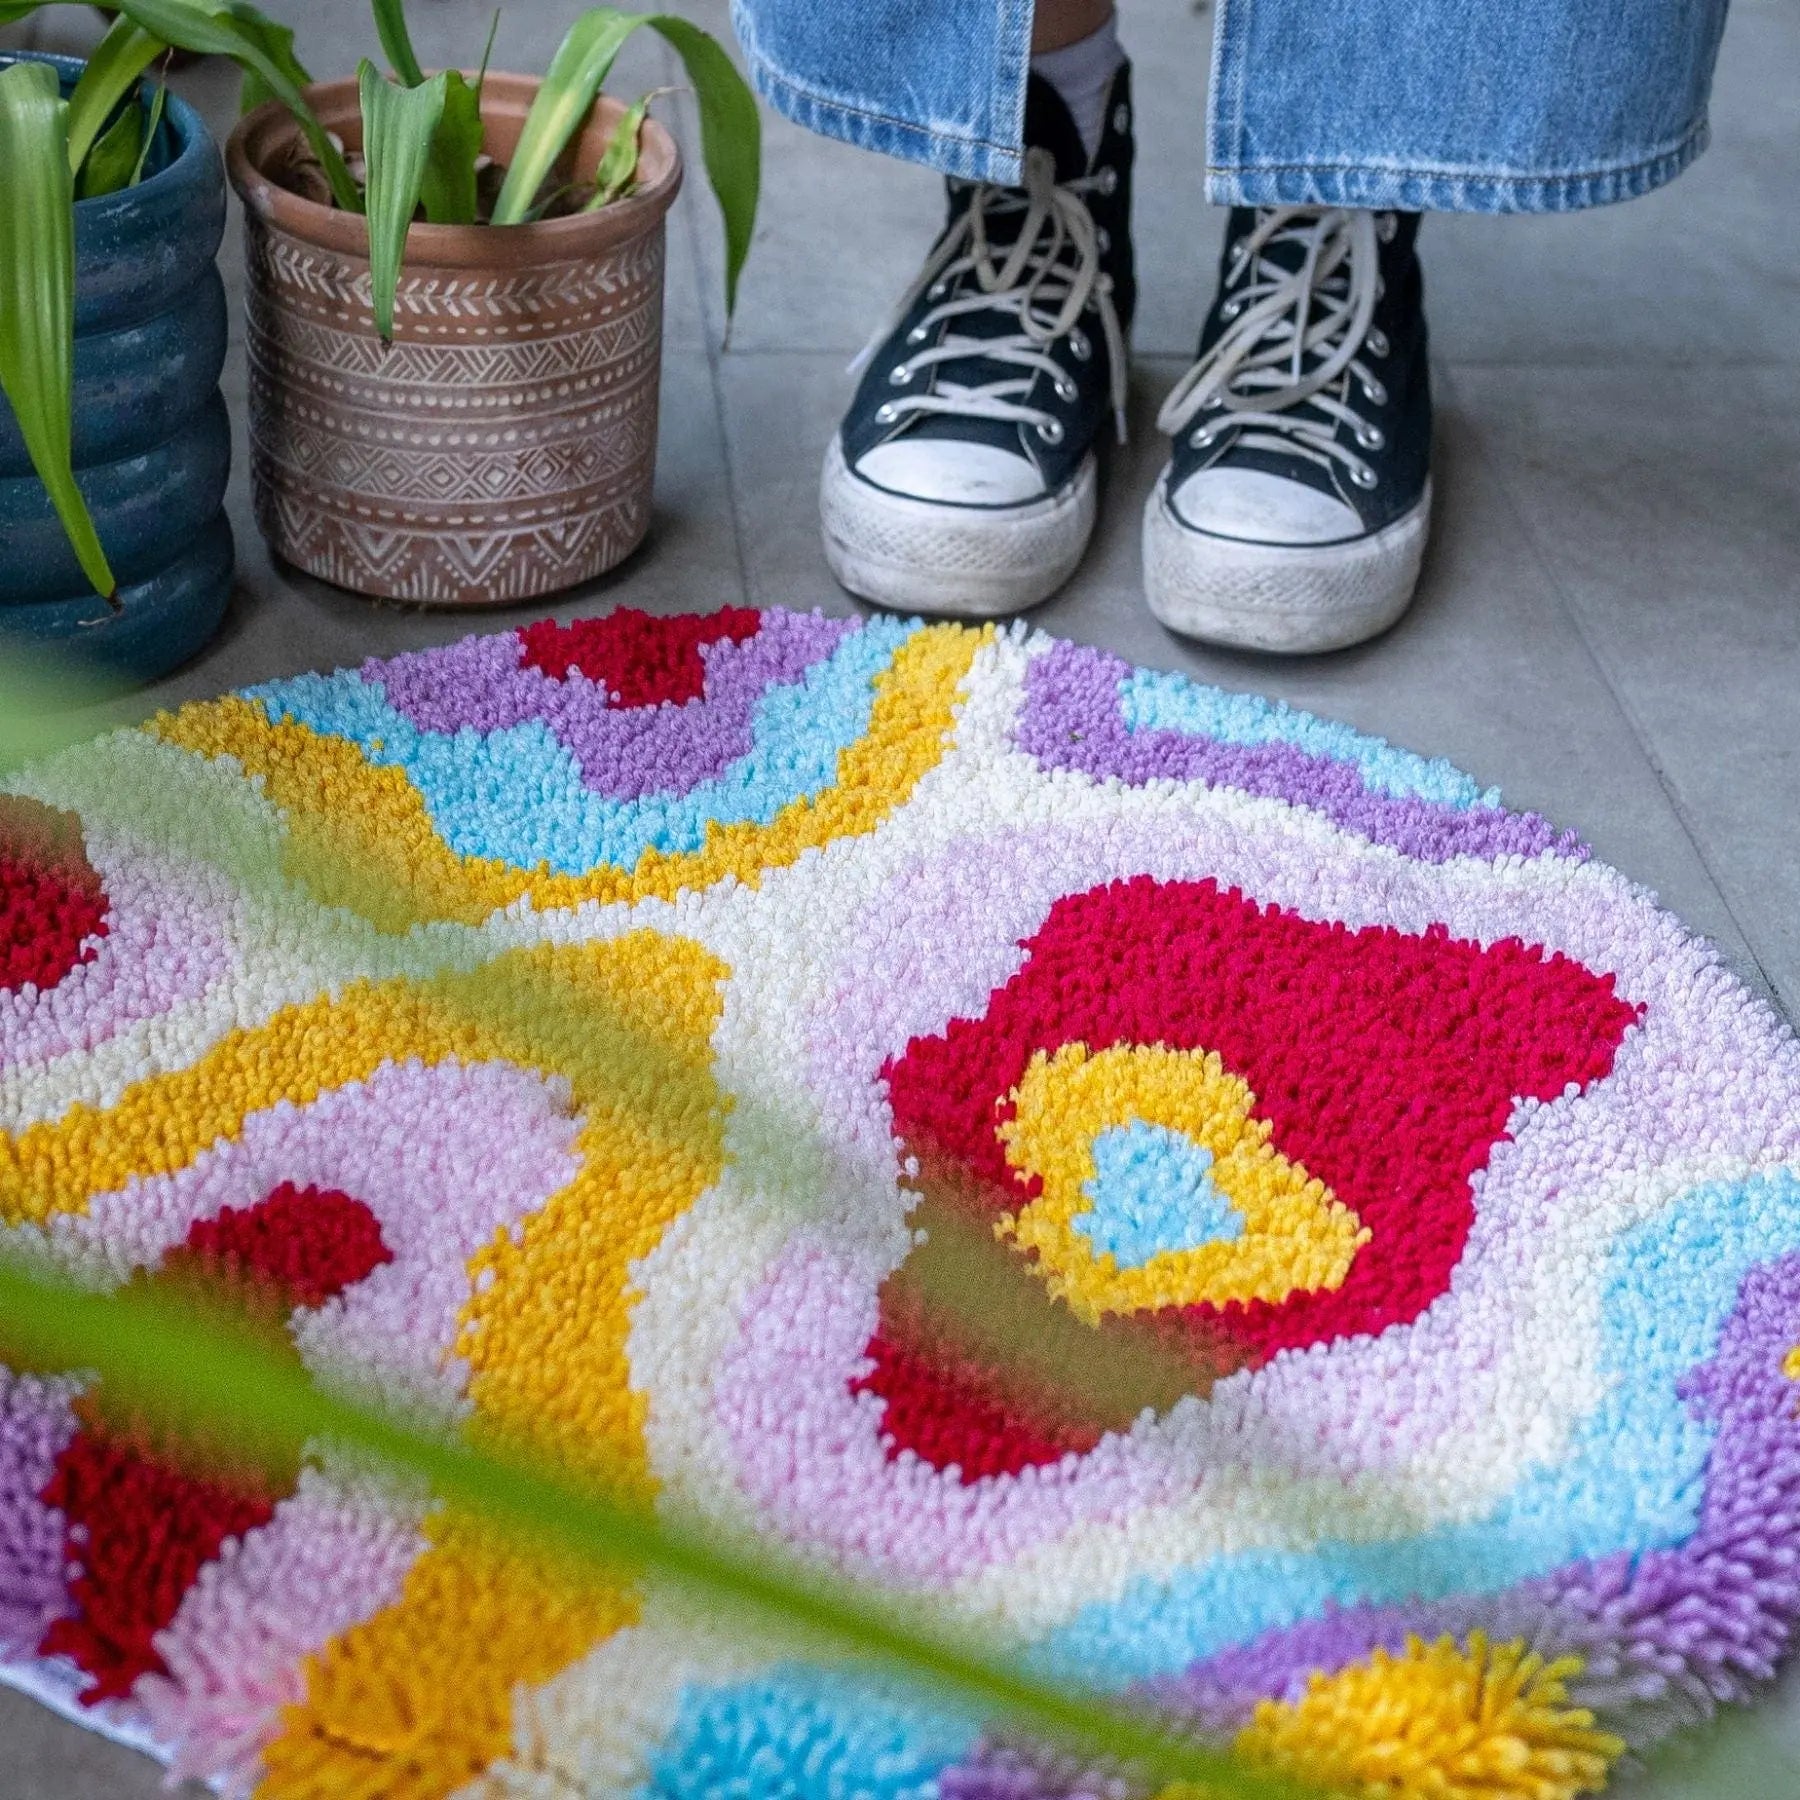 Craft Club Co PSYCHEDELIA Rug Making Kit